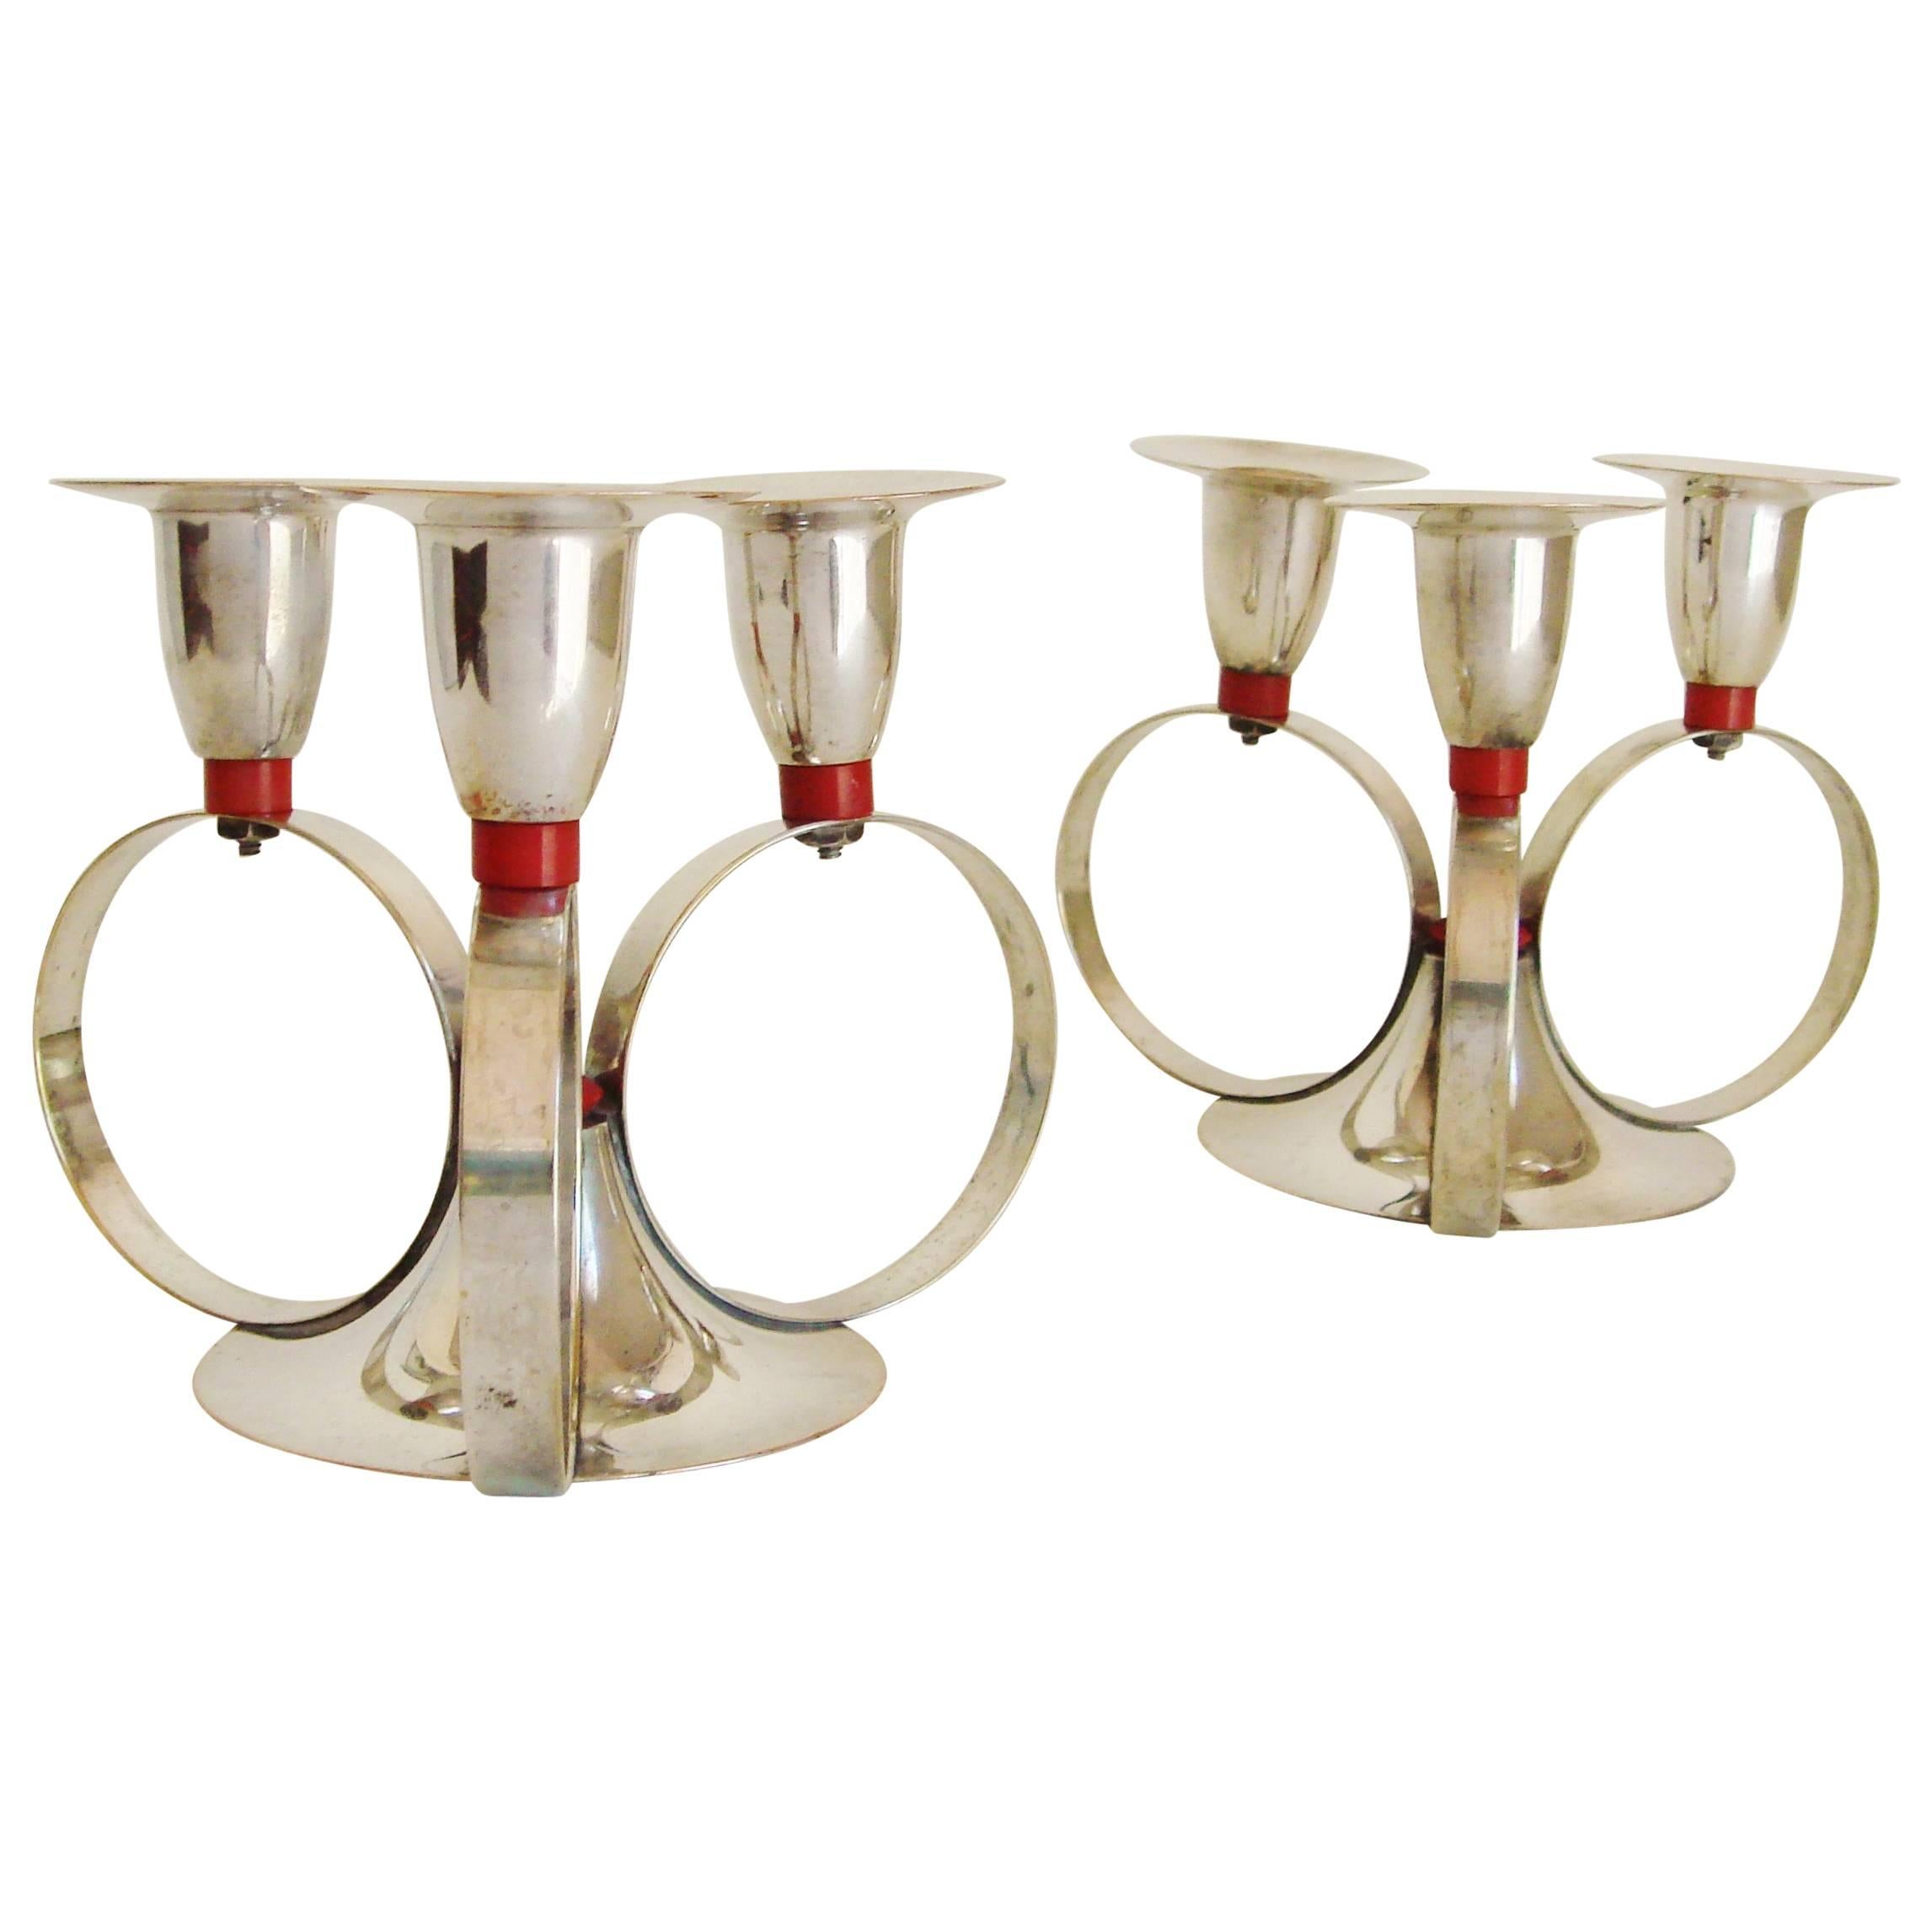 Pair of American Art Deco Silver Plated Candleholders with Red Bakelite Accents For Sale